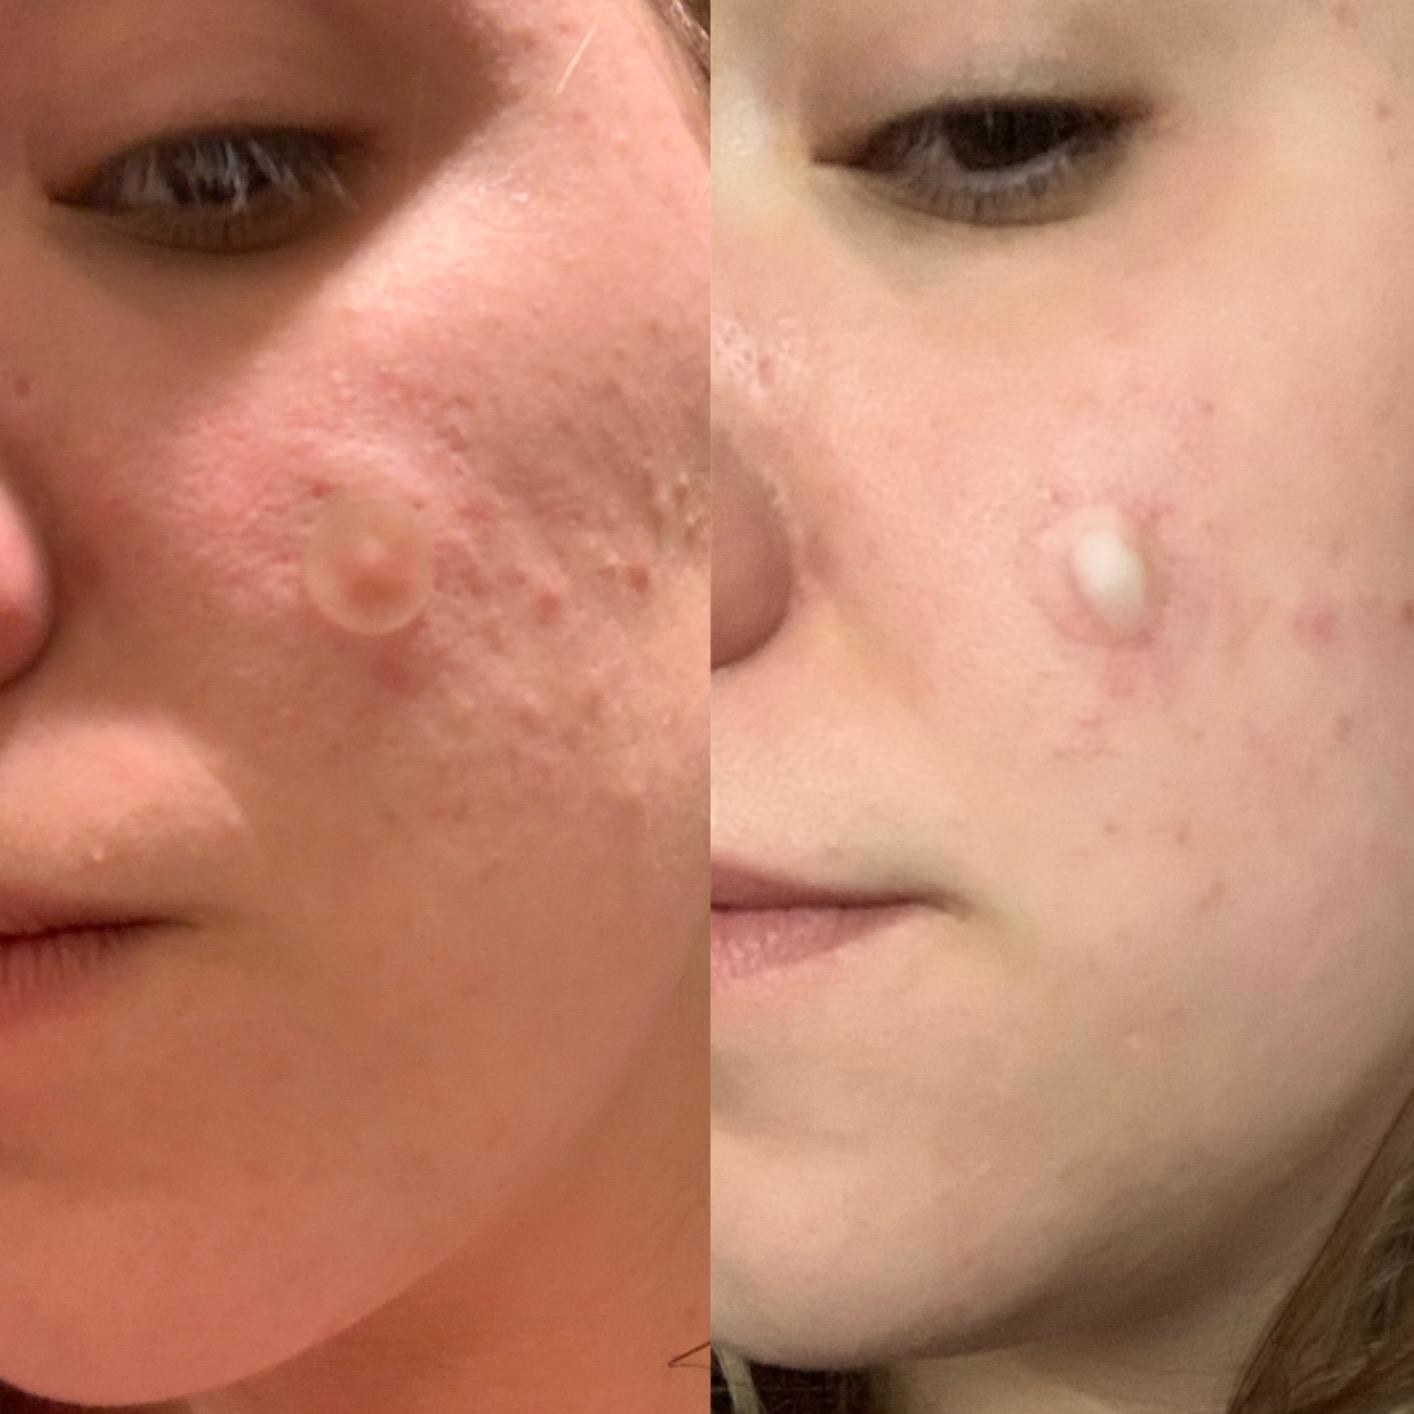 Reviewer before and after using the pimple patches